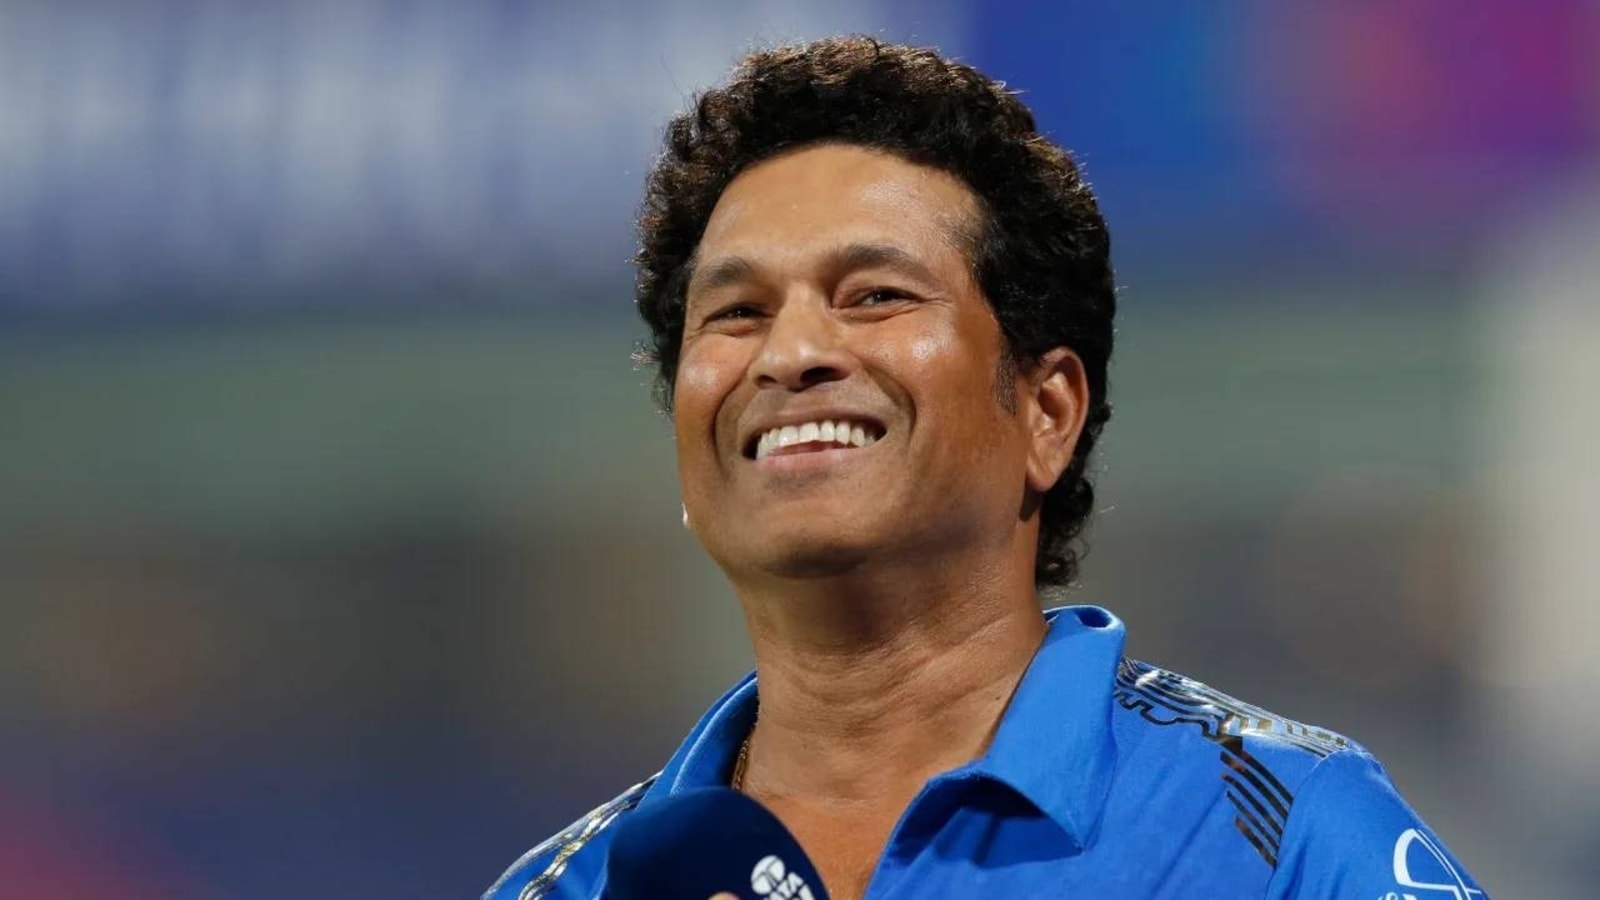 he-knows-he-need-not-worry-about-getting-picked-sachin-tendulkar-explains-star-india-cricketer-s-meteoric-rise